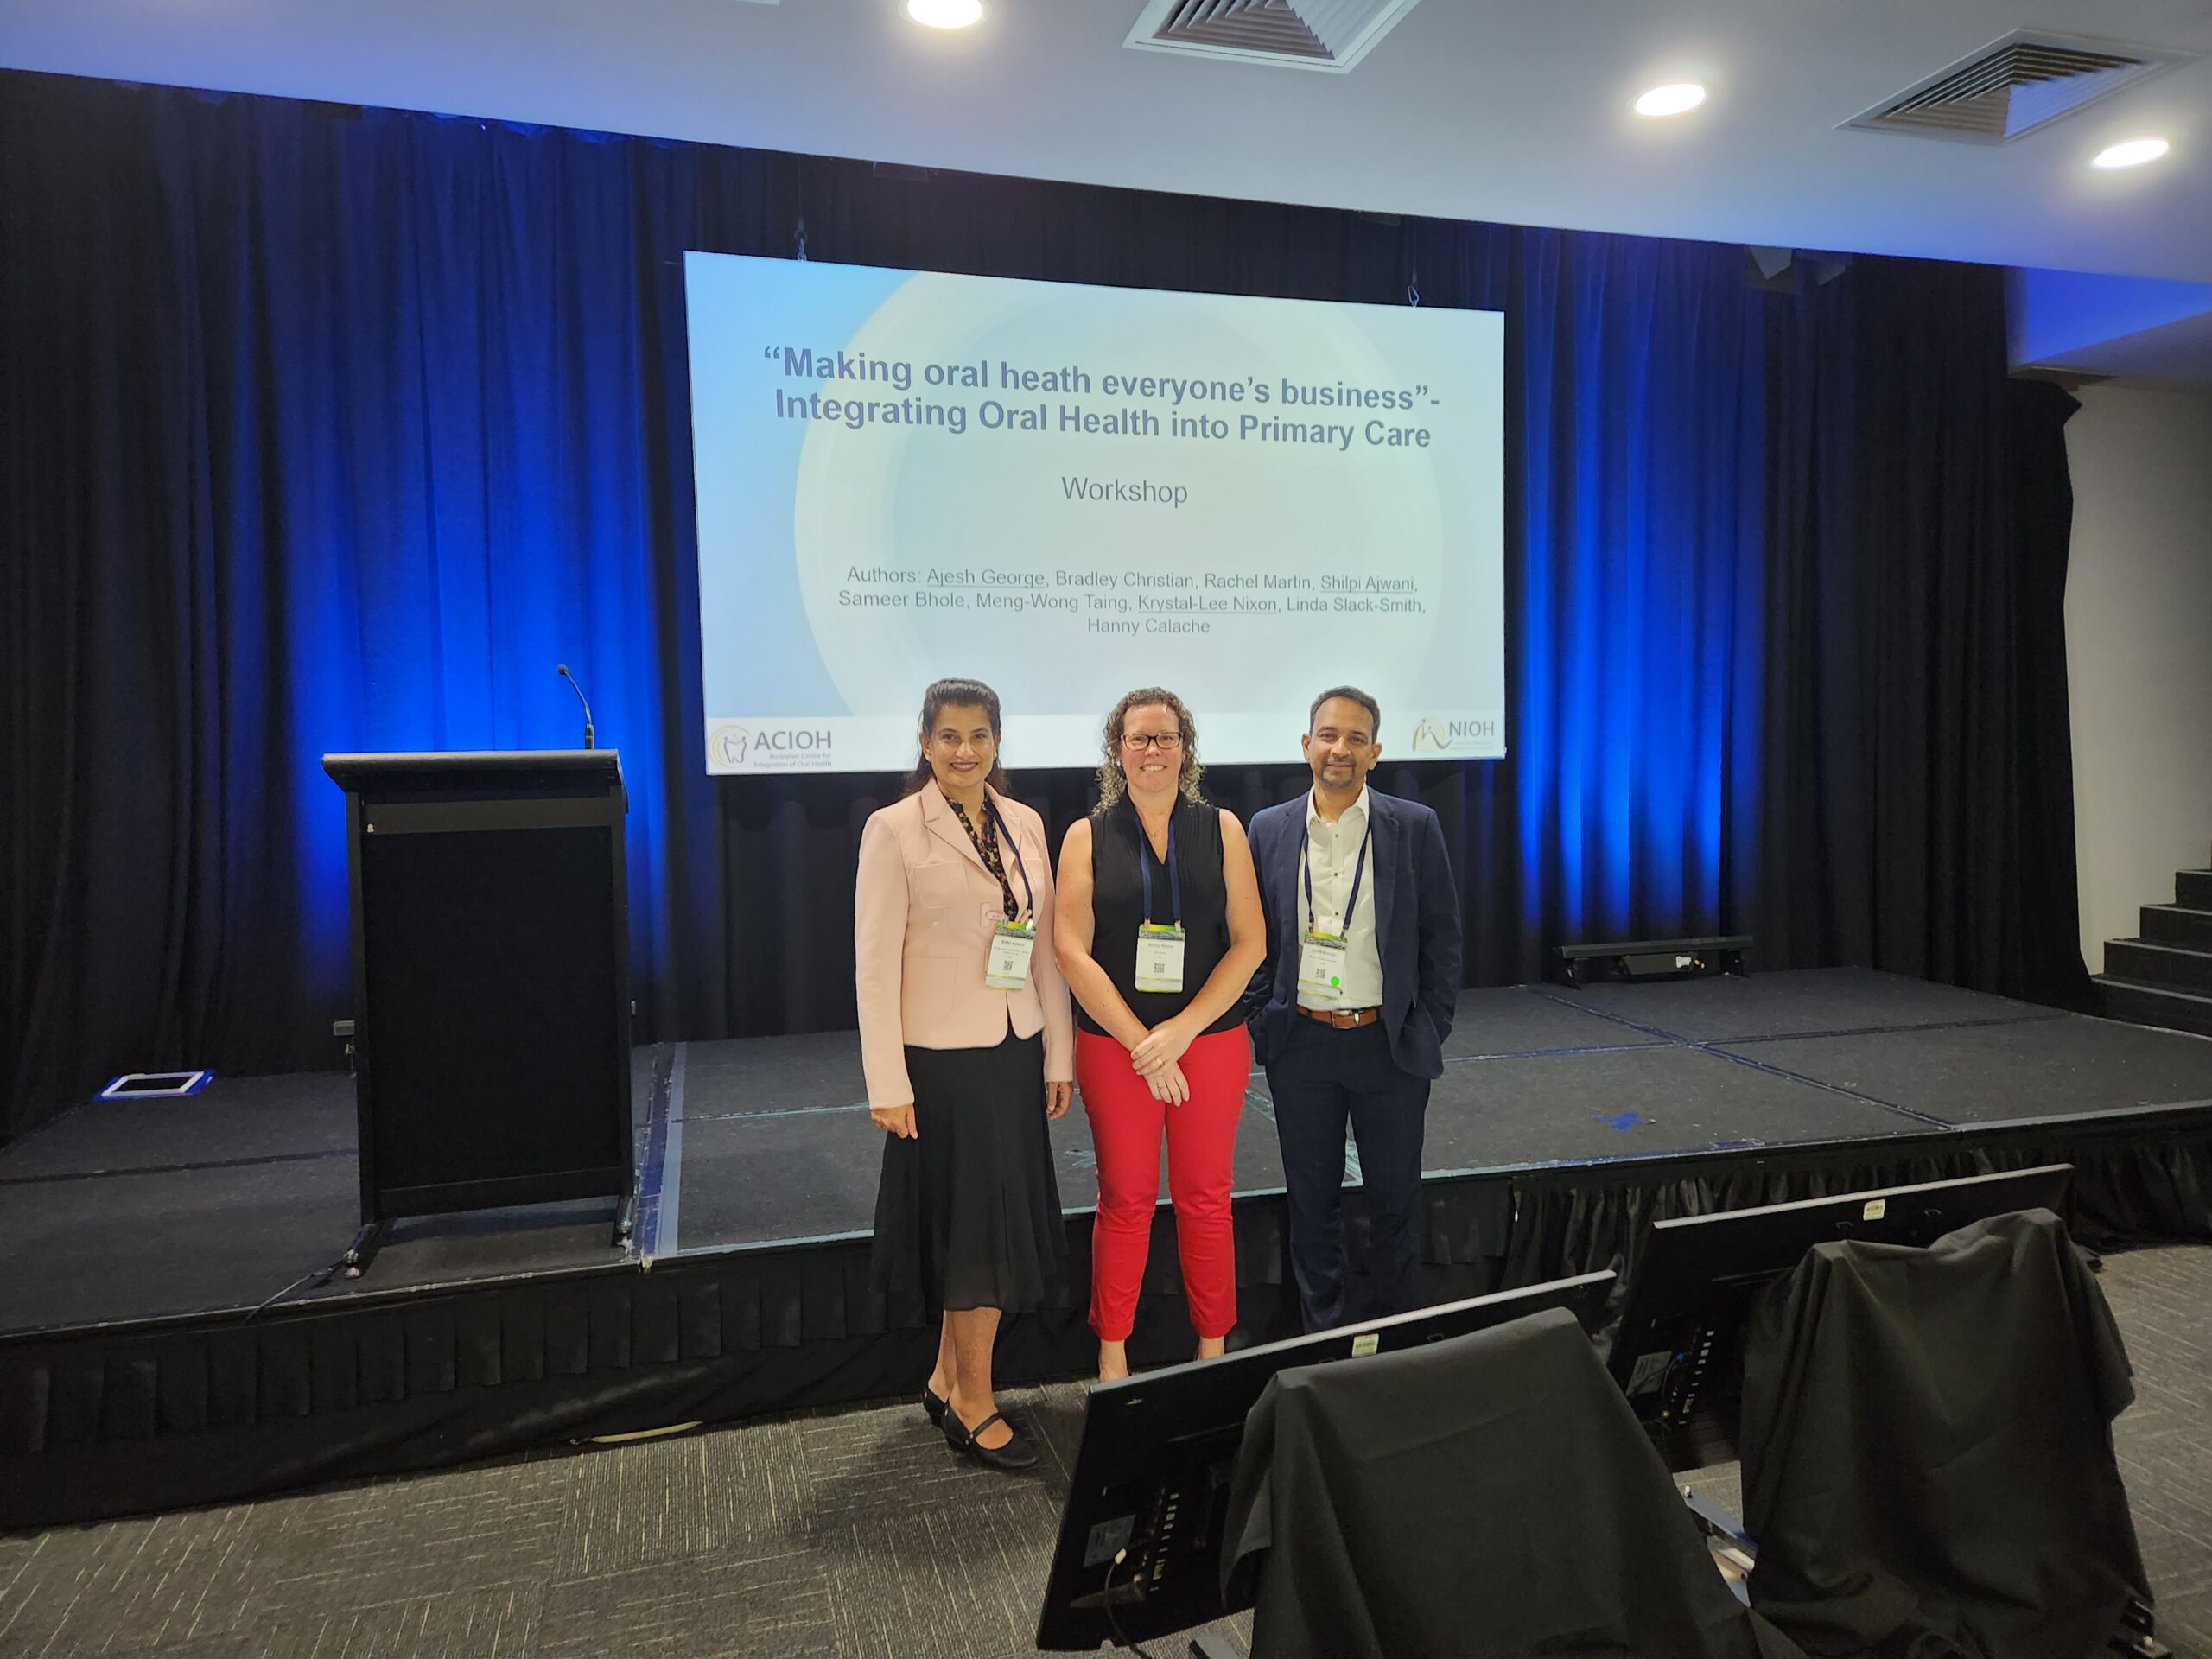 ACIOH Presents at Asia Pacific Conference on Integrated Care